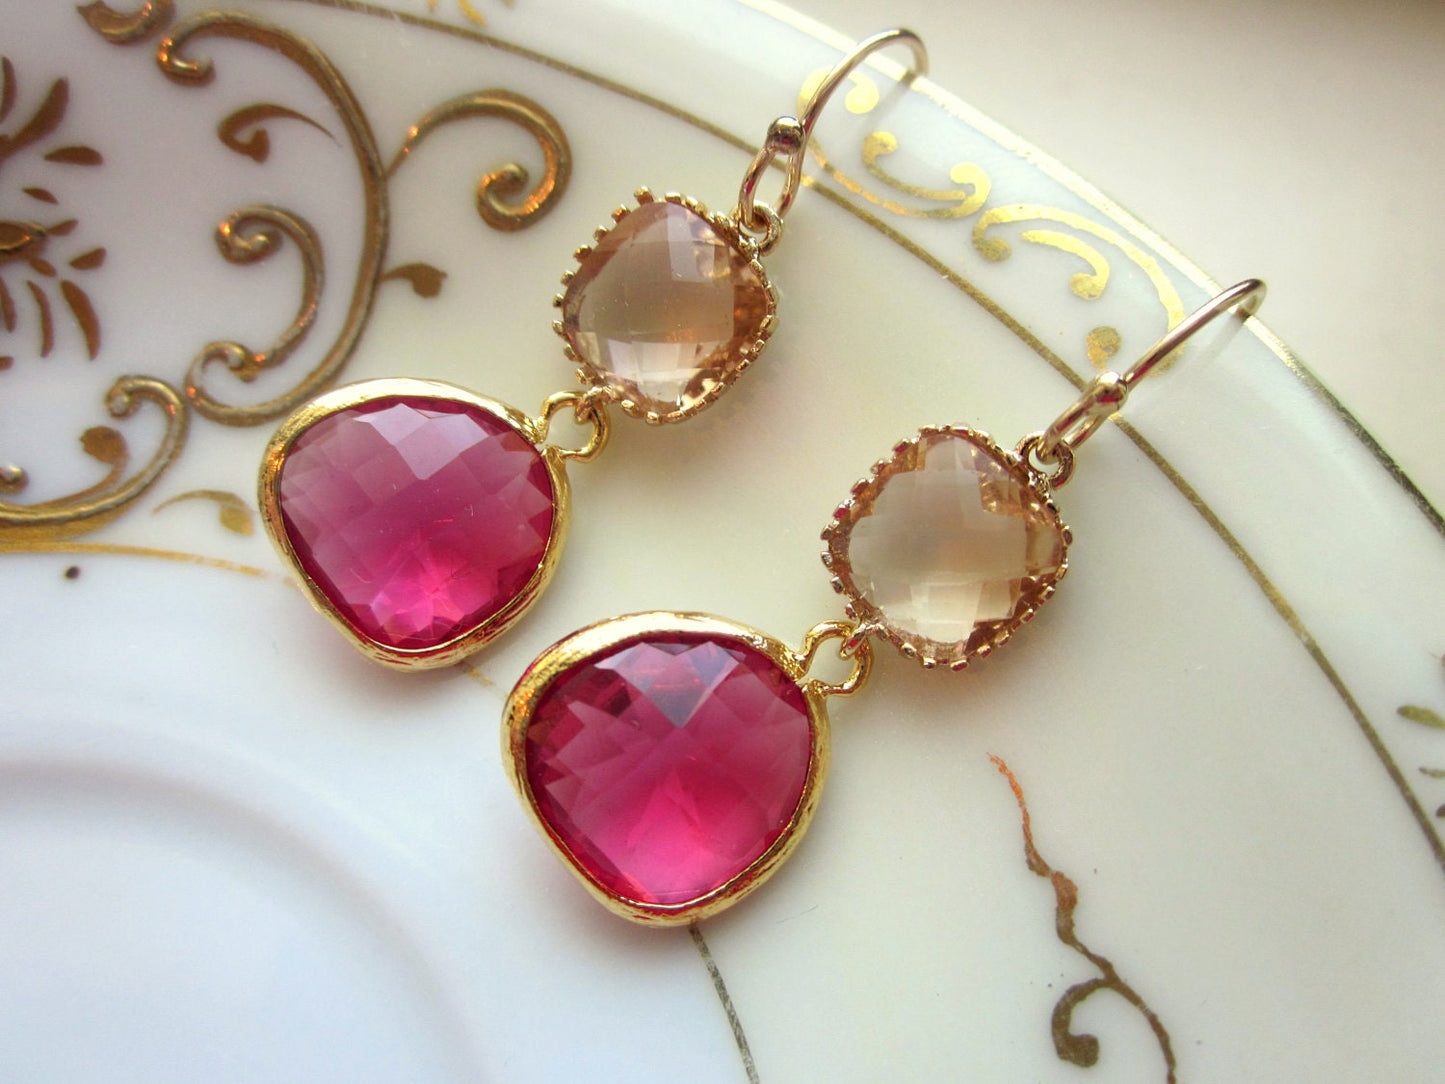 Fuchsia Earrings Champagne Peach Gold Two Tier - Bridesmaid Earrings - Wedding Earrings - Valentines Day Gift